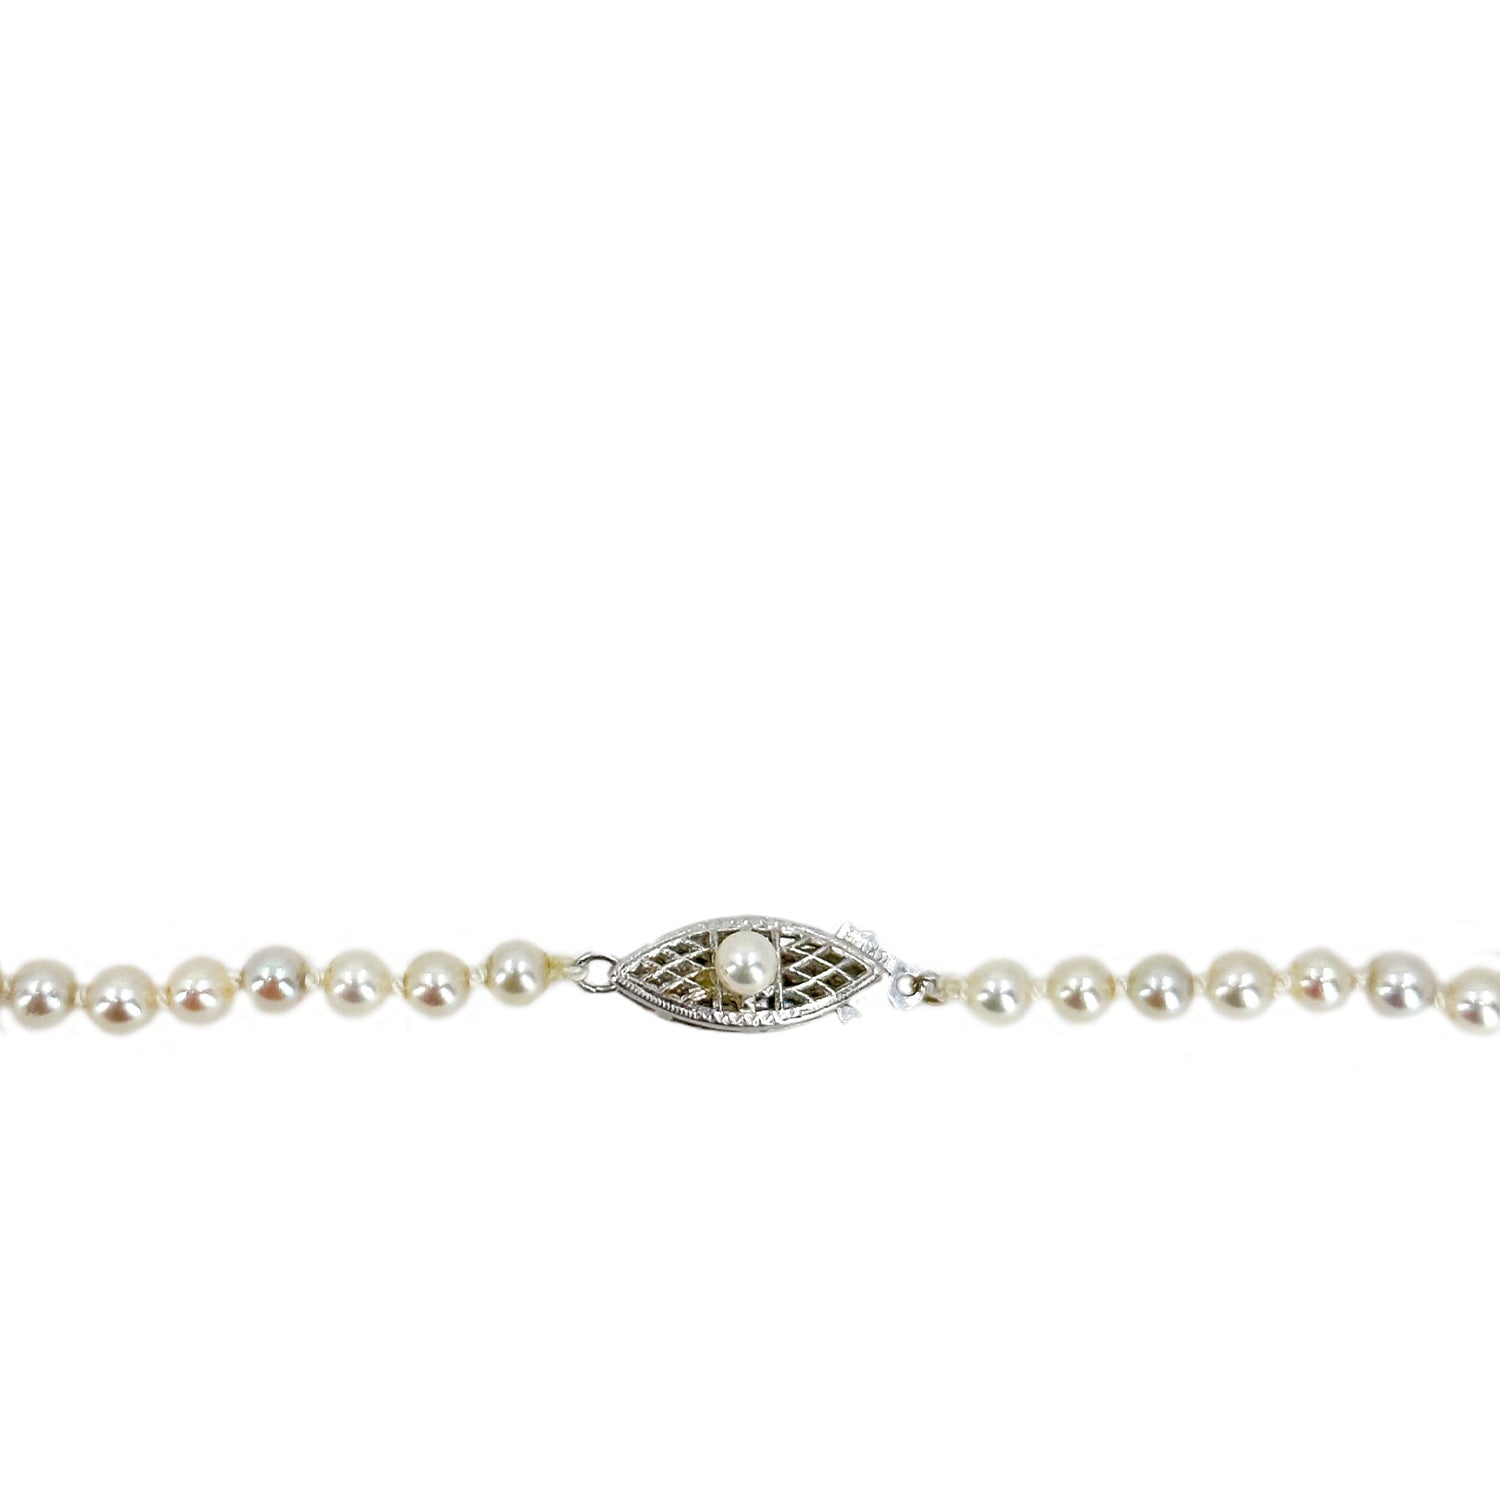 High Quality Graduated Vintage Japanese Saltwater Cultured Akoya Pearl Necklace - 14K White Gold 21.50 Inch